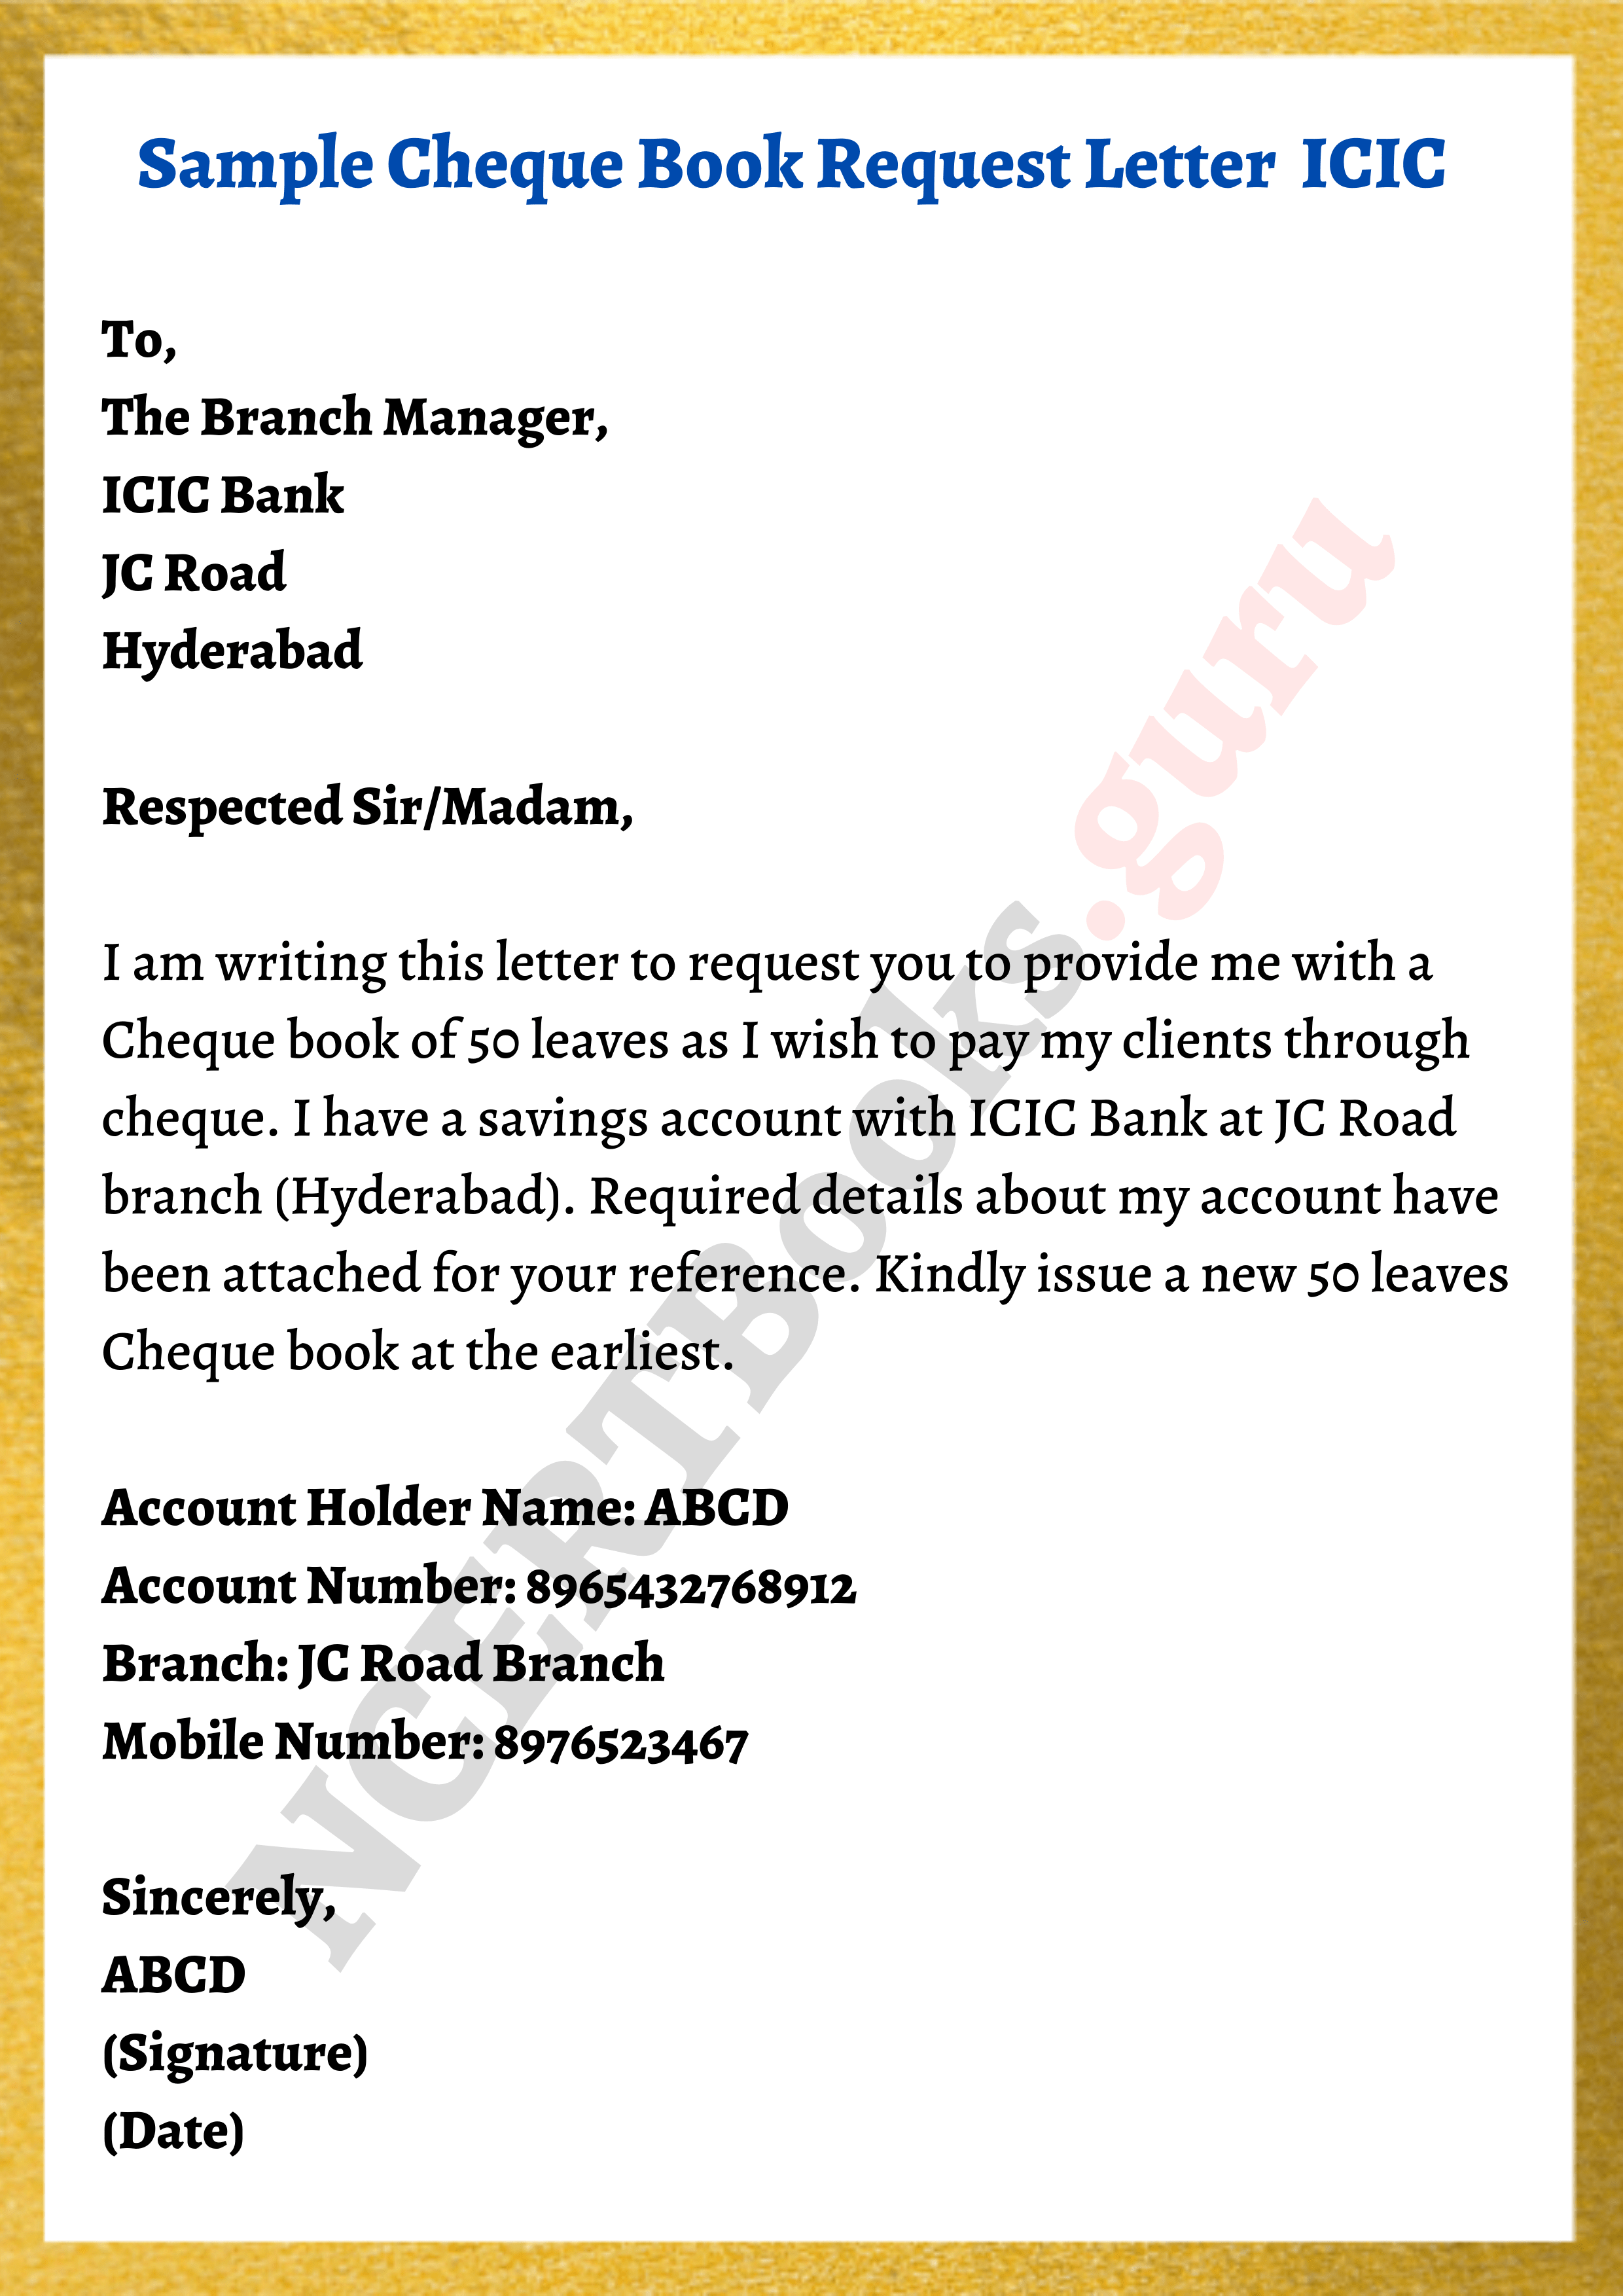 Cheque Book Request Letter Formats, Samples & How To Write A Letter?